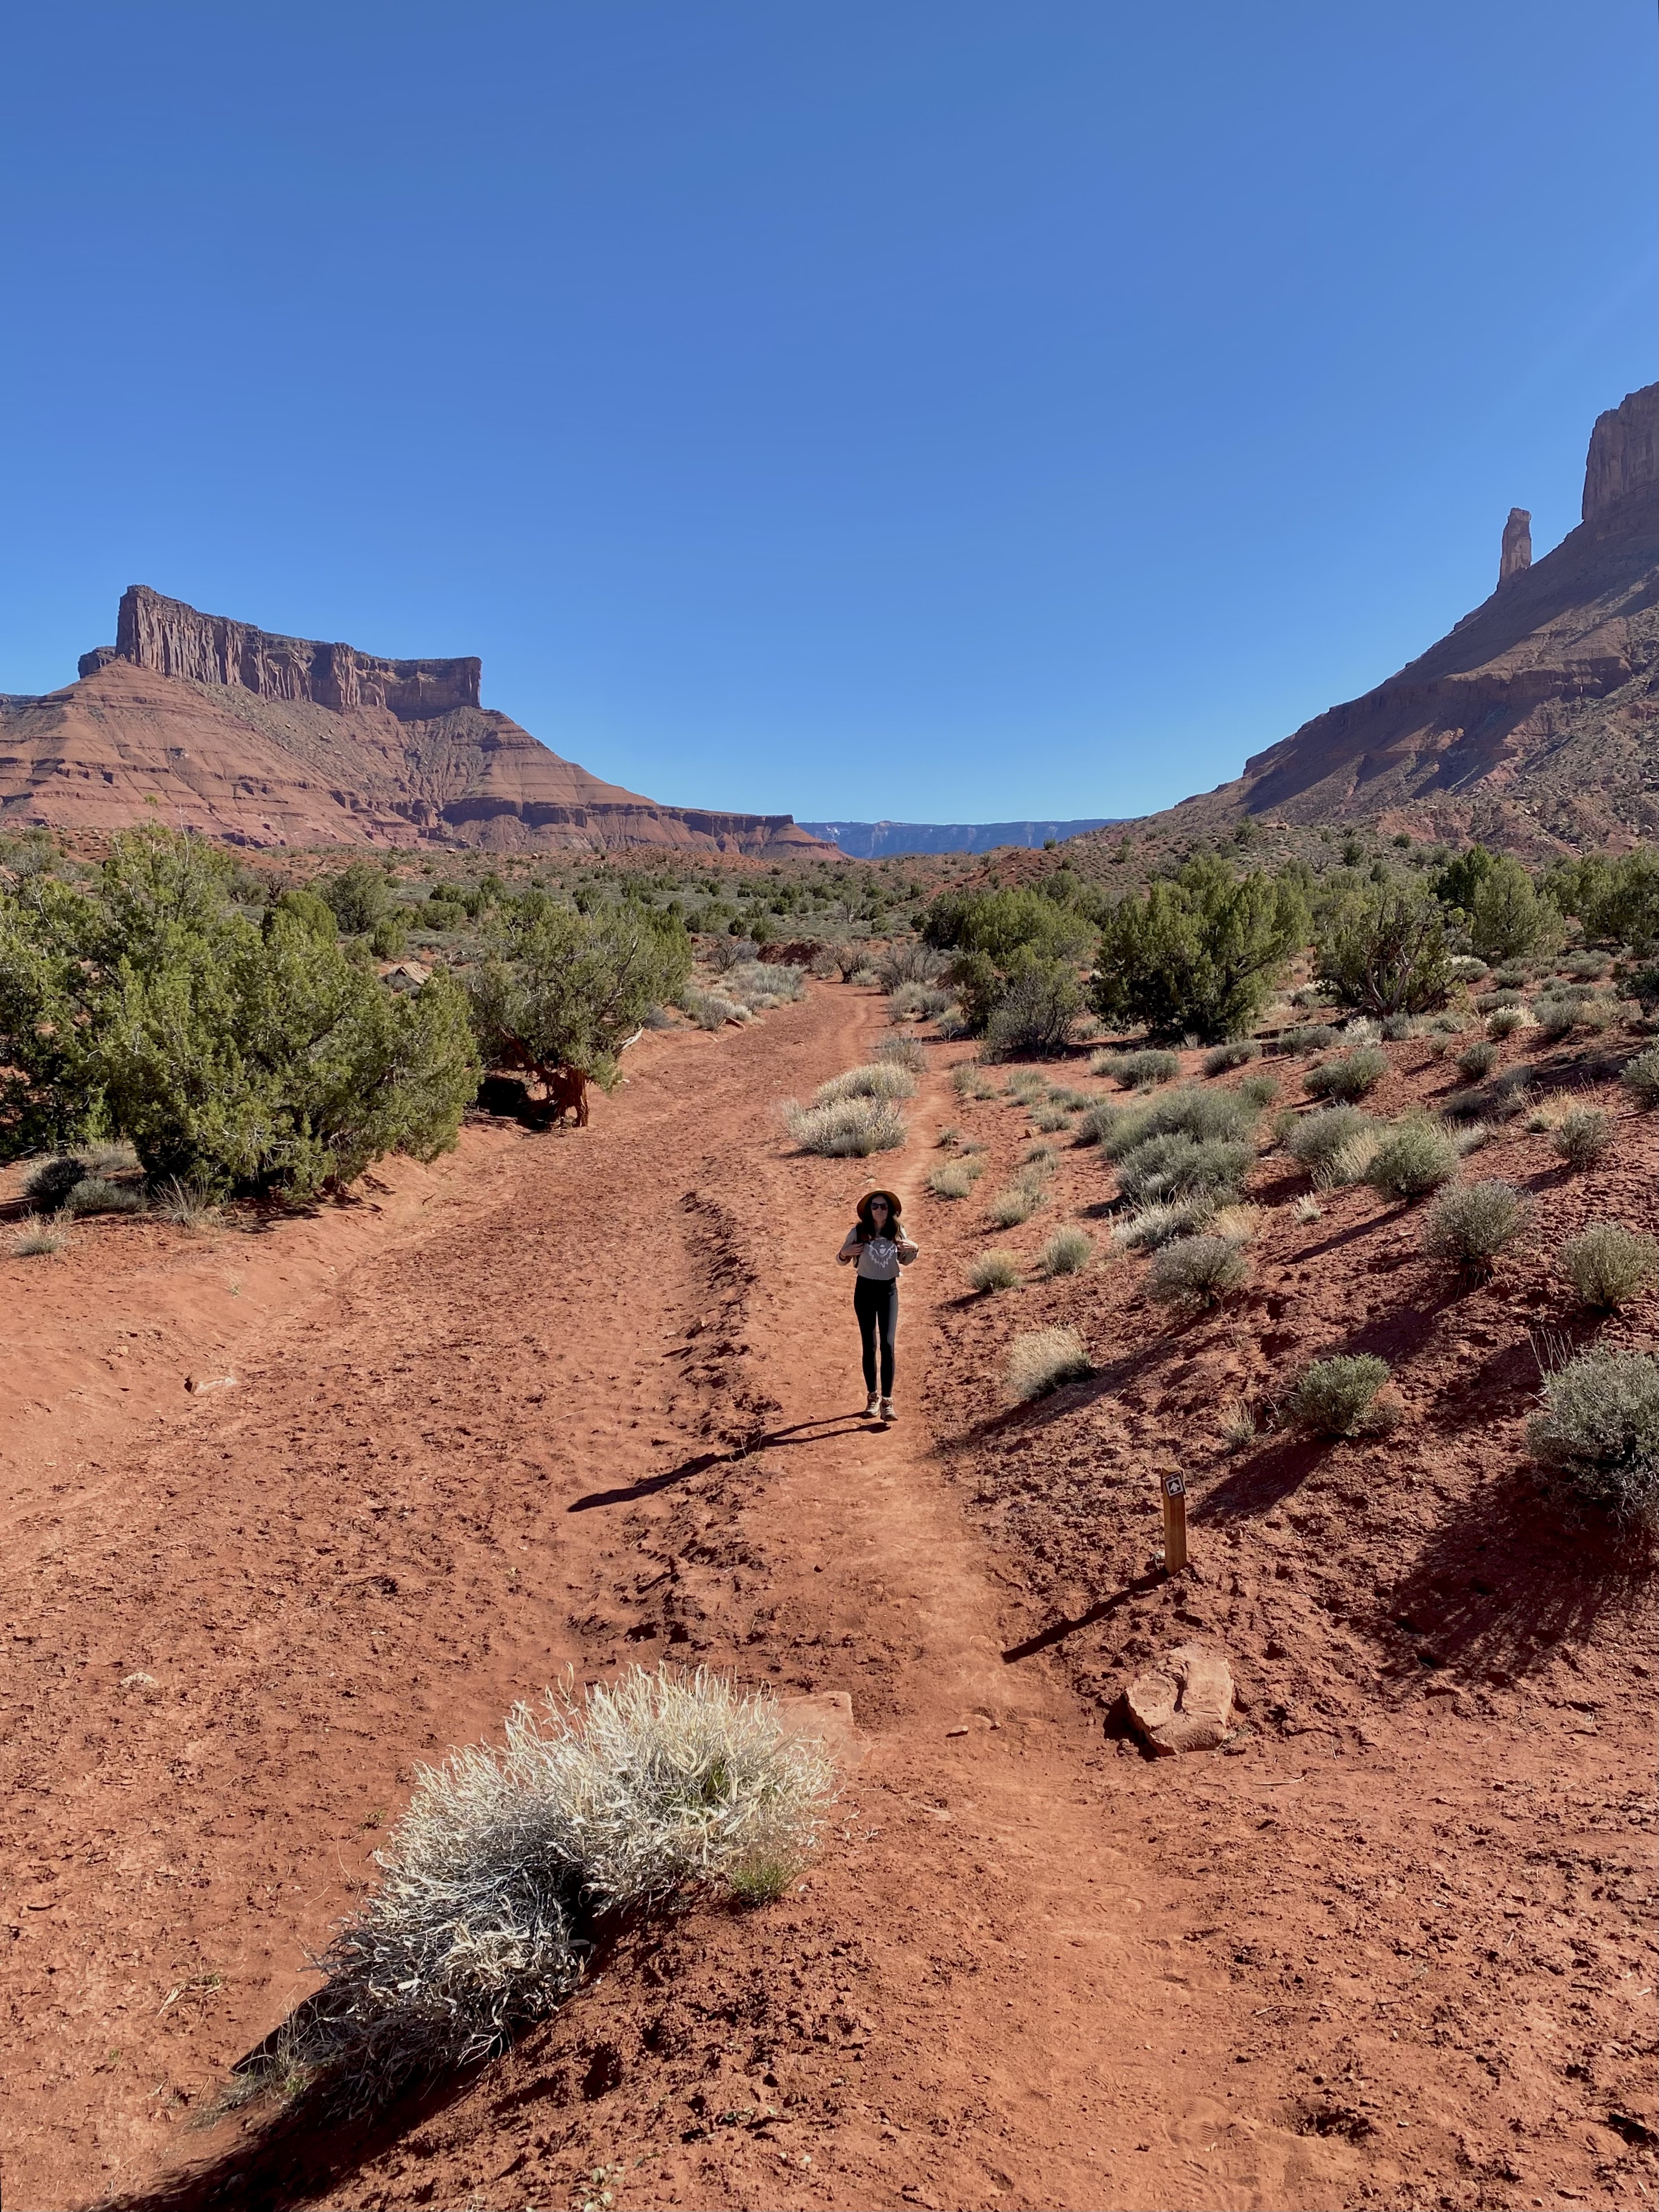 Caroline, in a green sweater and black pants, walks along a trail through red dirt. Flat topped mountains with bright blue sky form the backdrop. 